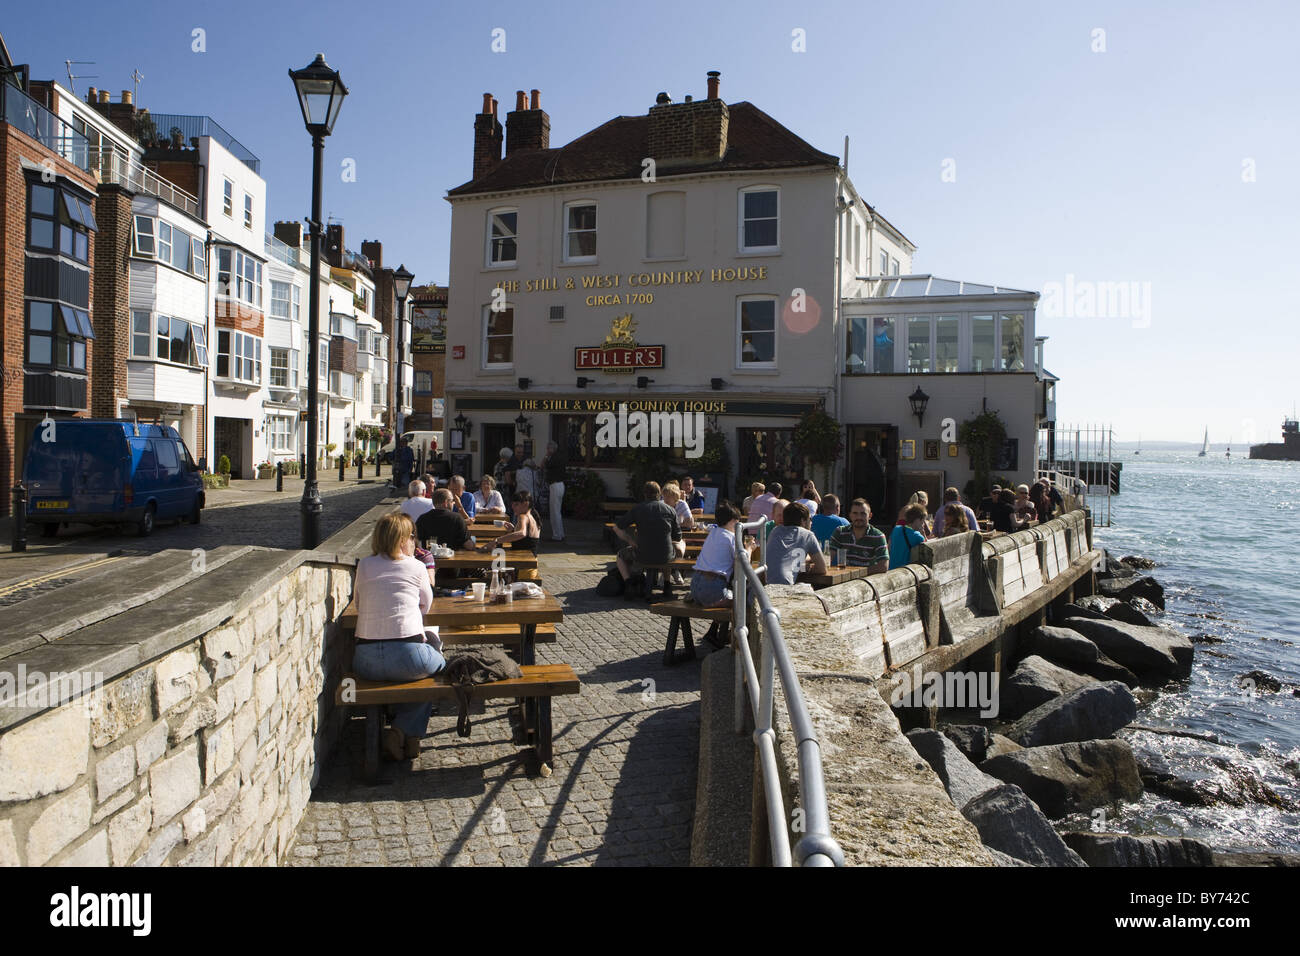 People outside The Still and West Country House Pub in Old Portsmouth, Portsmouth, Hampshire, England, Europe Stock Photo